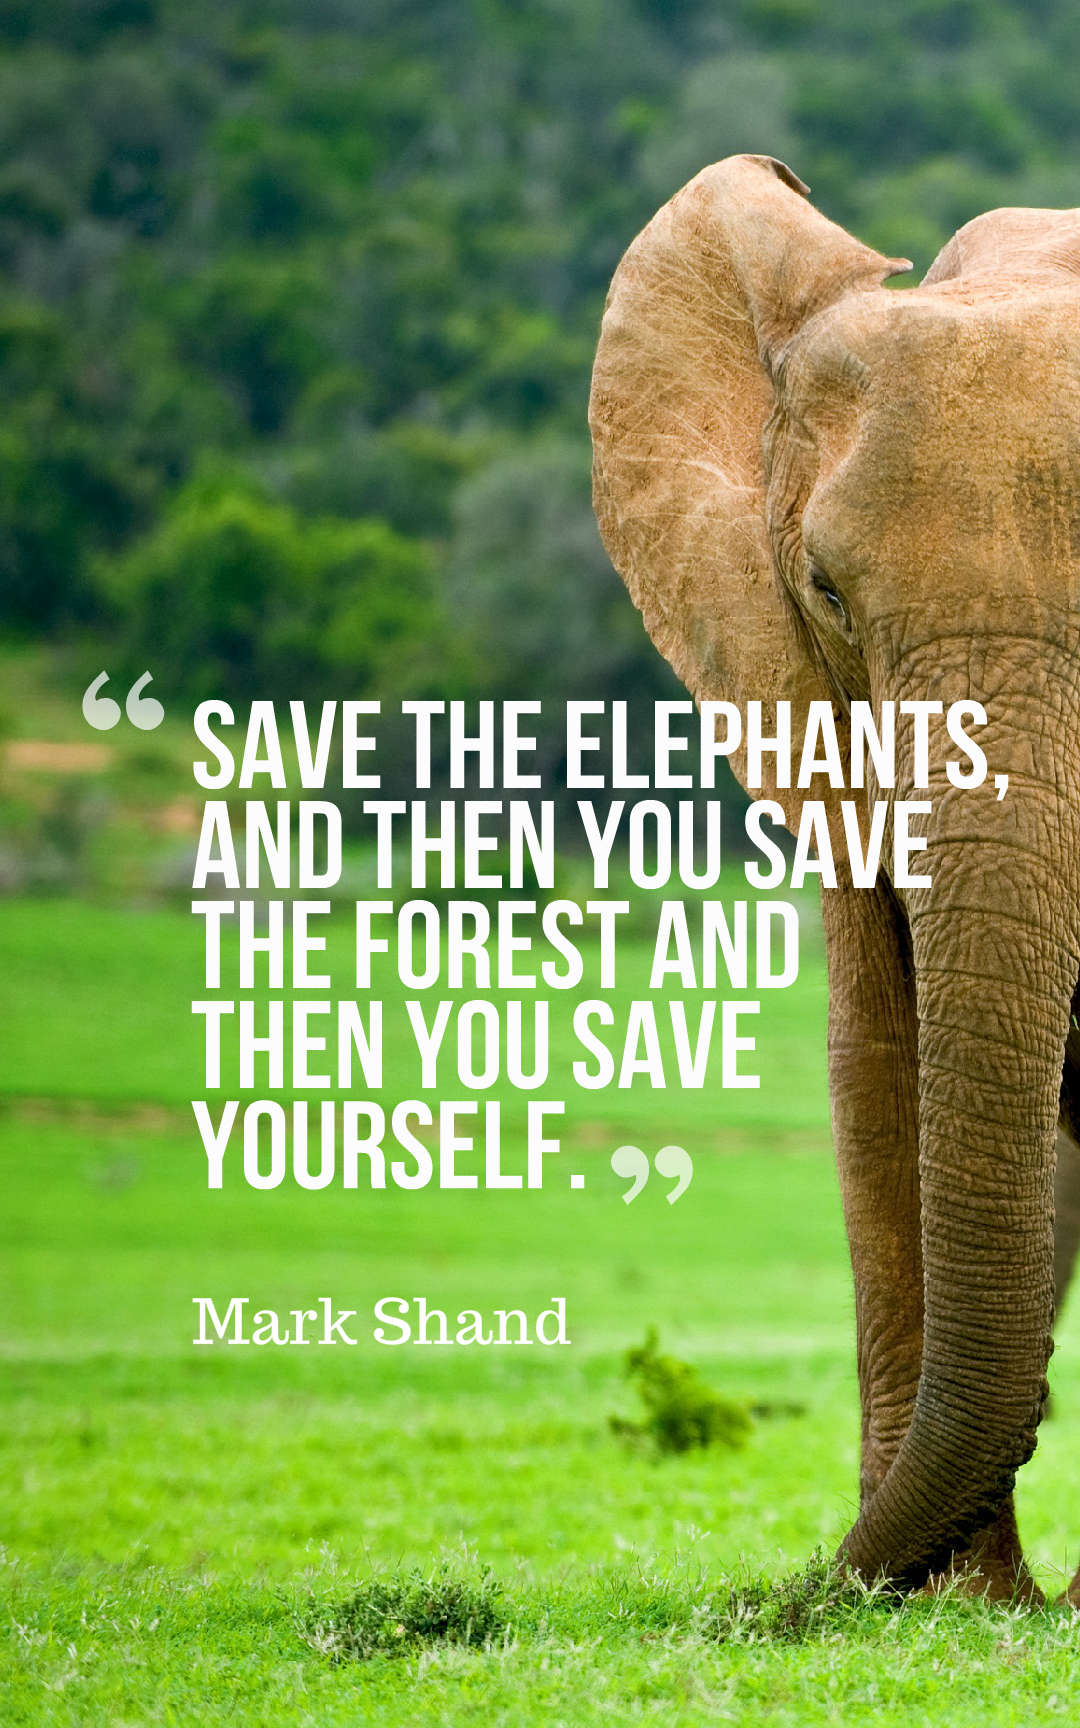 Save the elephants, and then you save the forest - and then you save yourself.